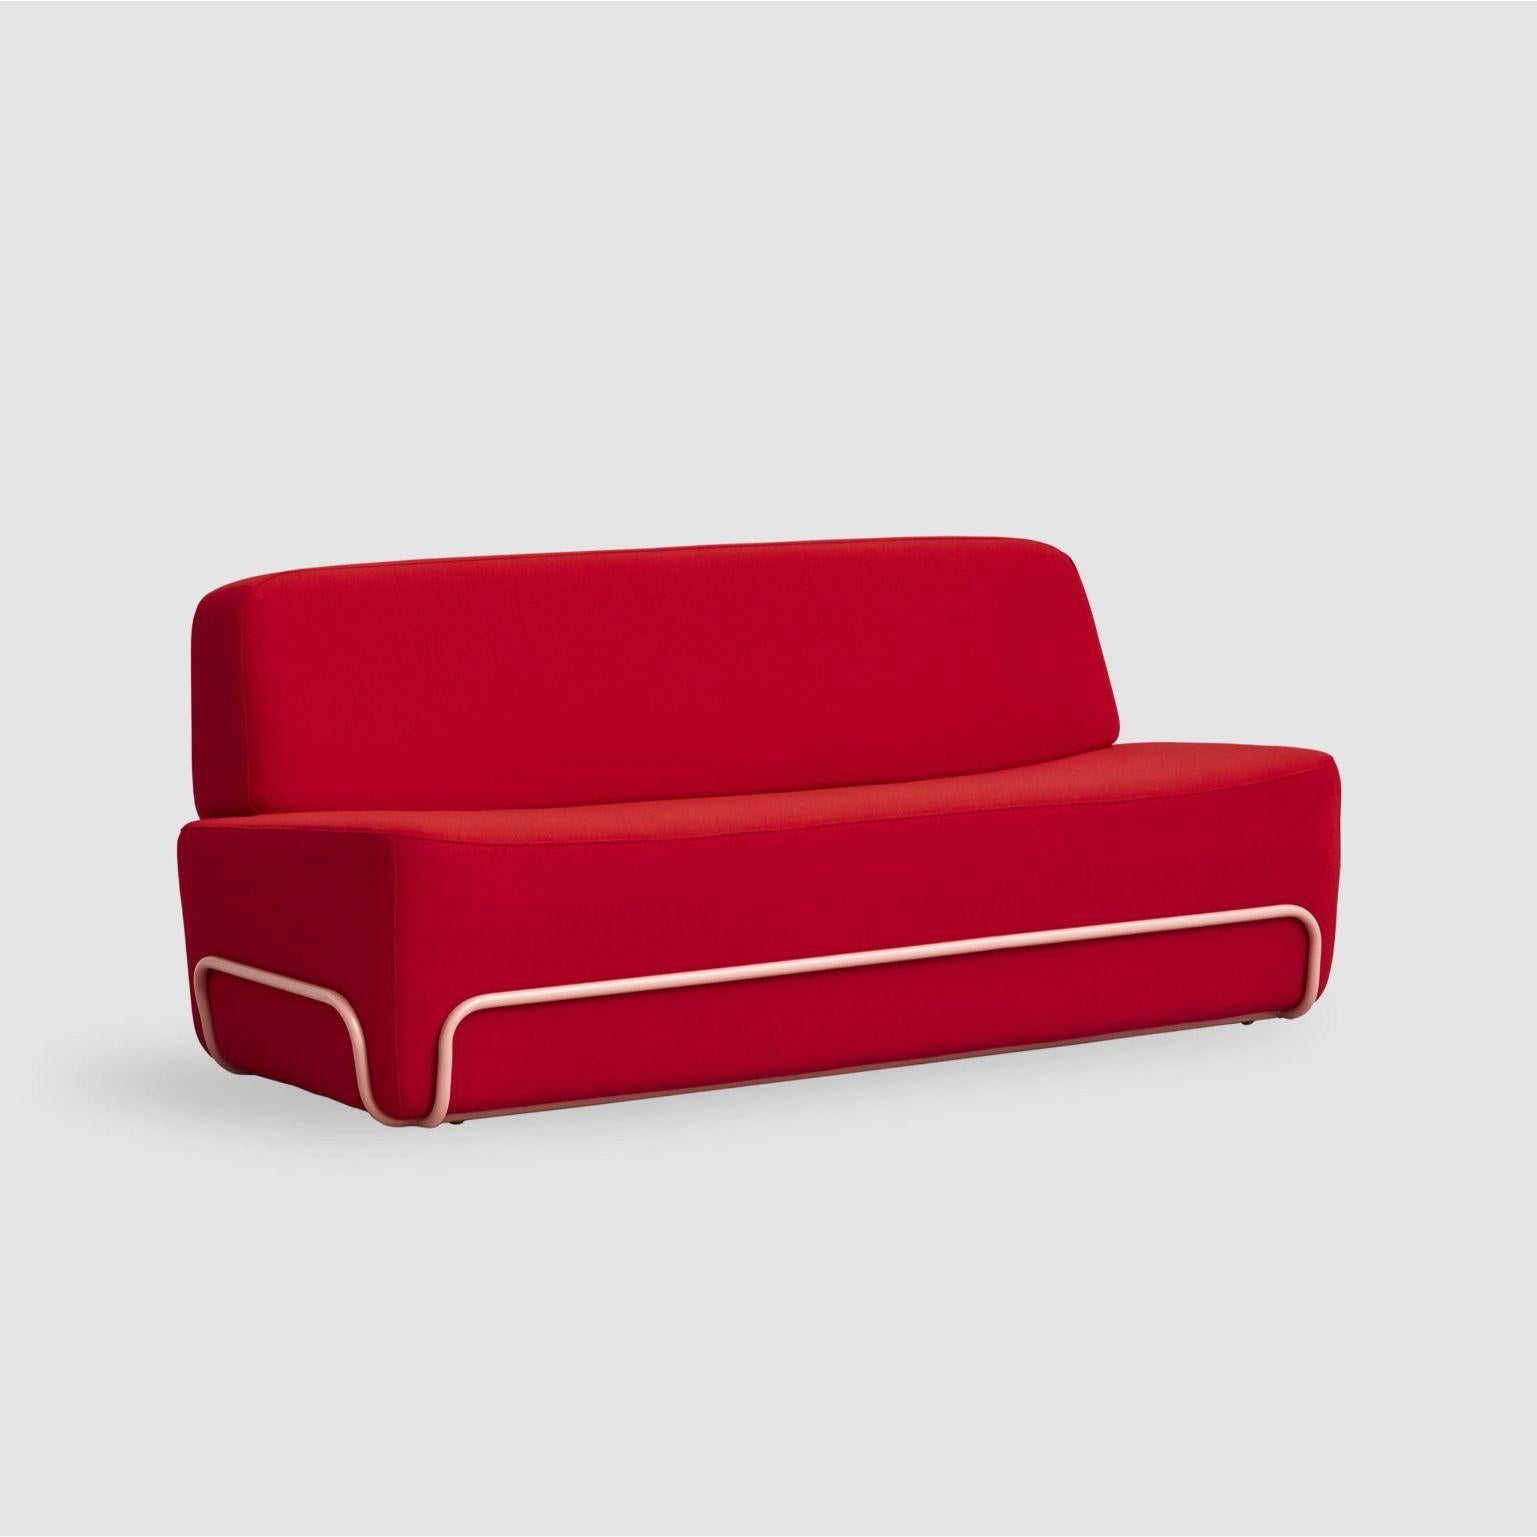 Pigro sofa by Pepe Albargues
Dimensions: W 182, D 90, H 77, seat 42
Materials: pine wood structure, tablex and particles board.
Steel structure painted or chromed.
Foam CMHR (high resilience and flame retardant) for all our cushion filling